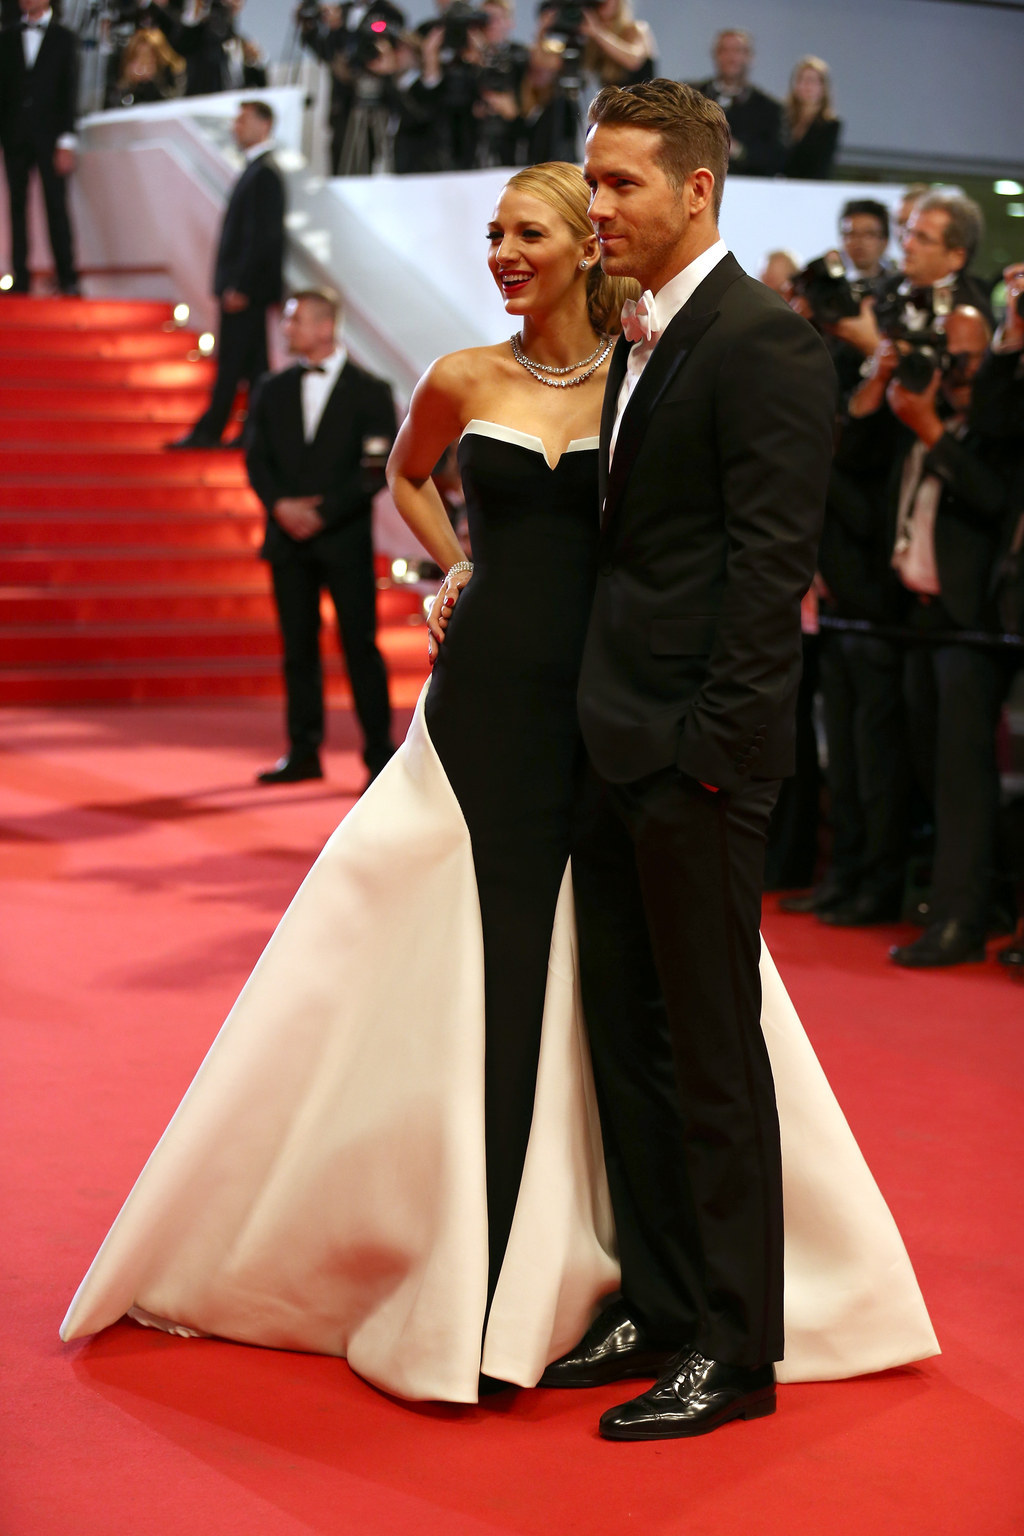 15 Photos Of Blake Lively Smiling With Her Husband Ryan Reynolds At Cannes